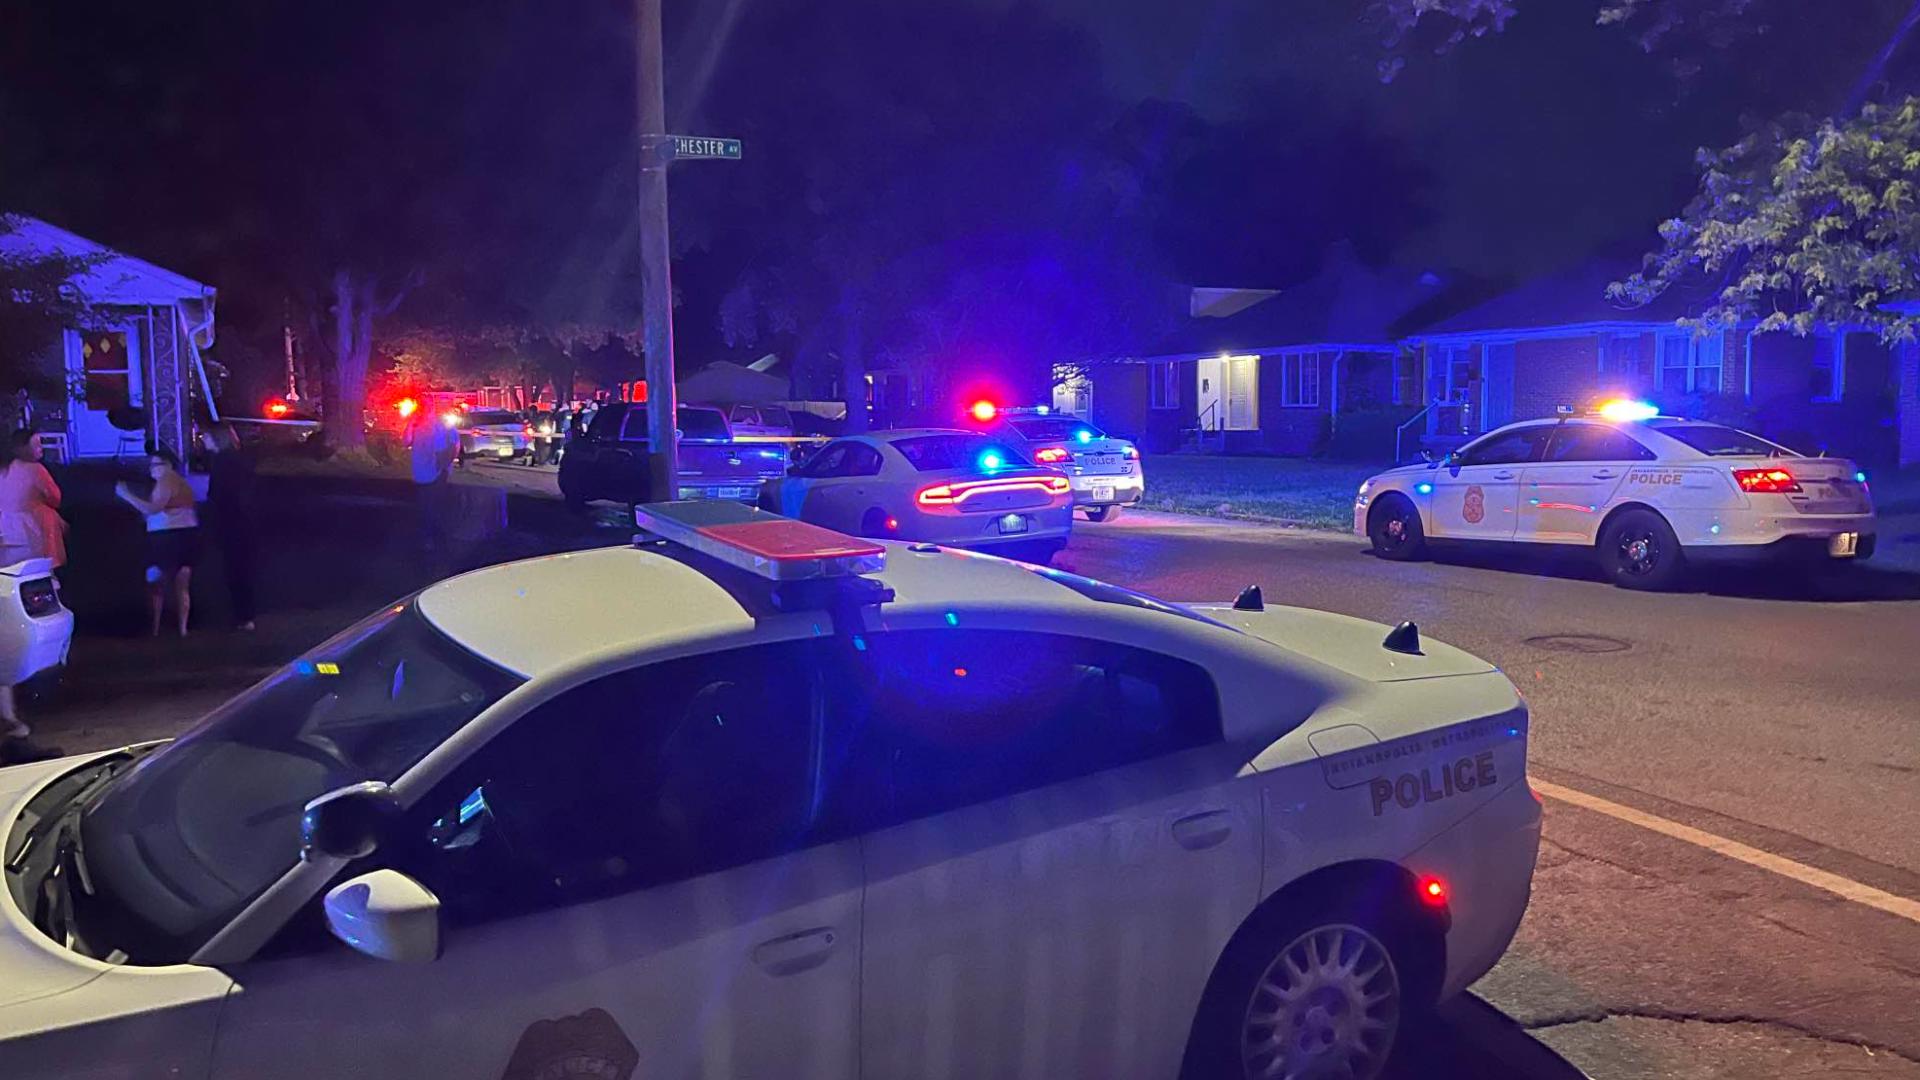 One person has died at two others, including a baby, were wounded in a shooting on the east side of Indianapolis Monday night.